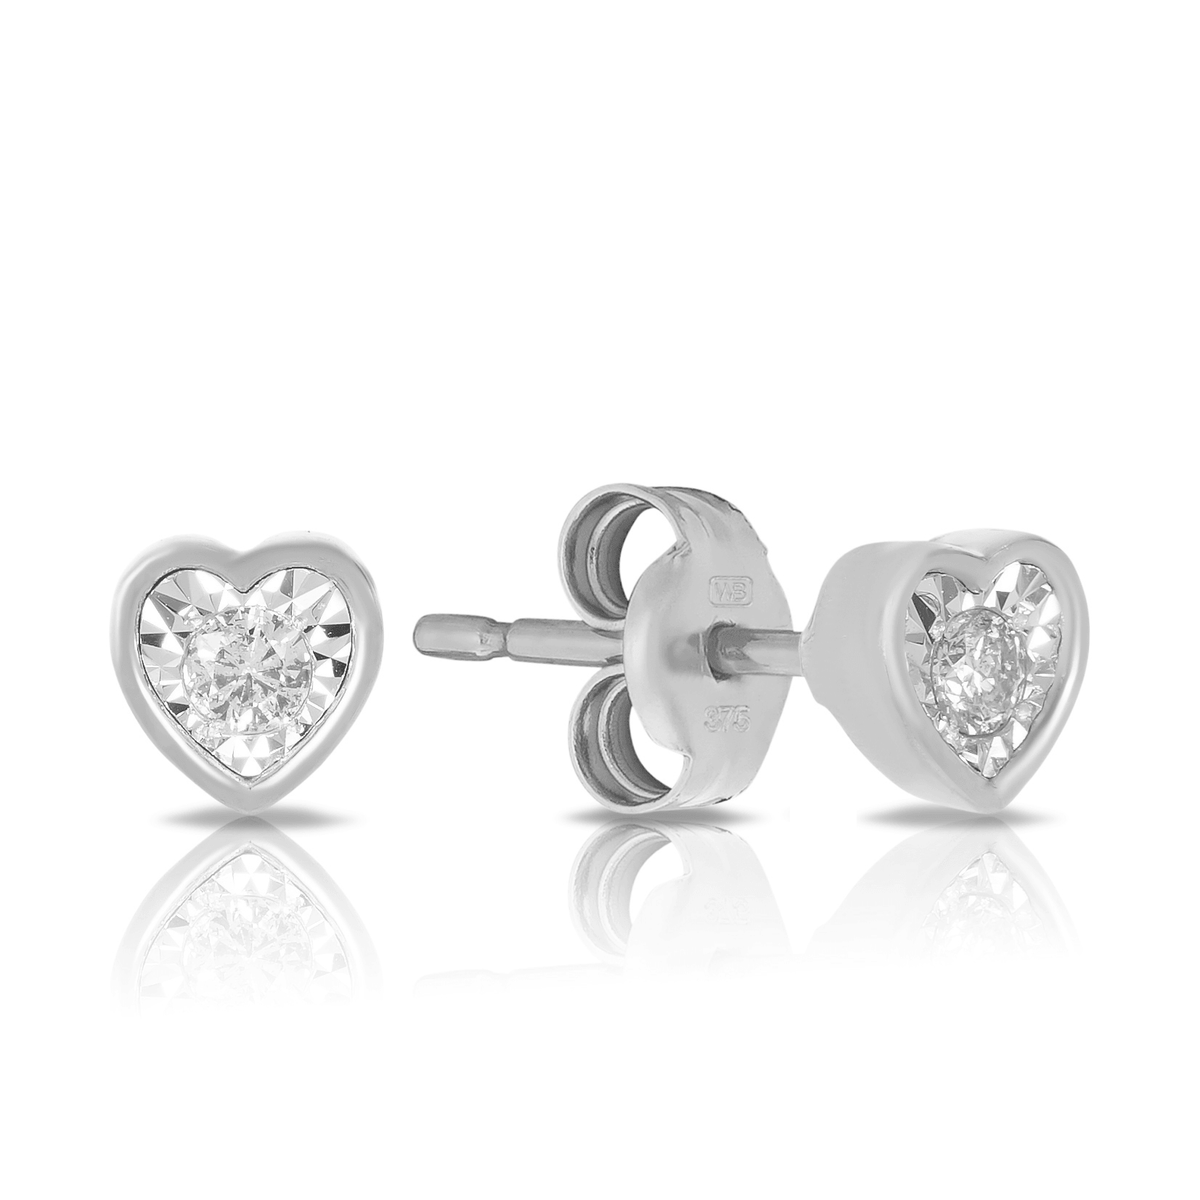 0.11ct TW Diamond Heart Stud Earrings in 9ct White Gold - Wallace Bishop